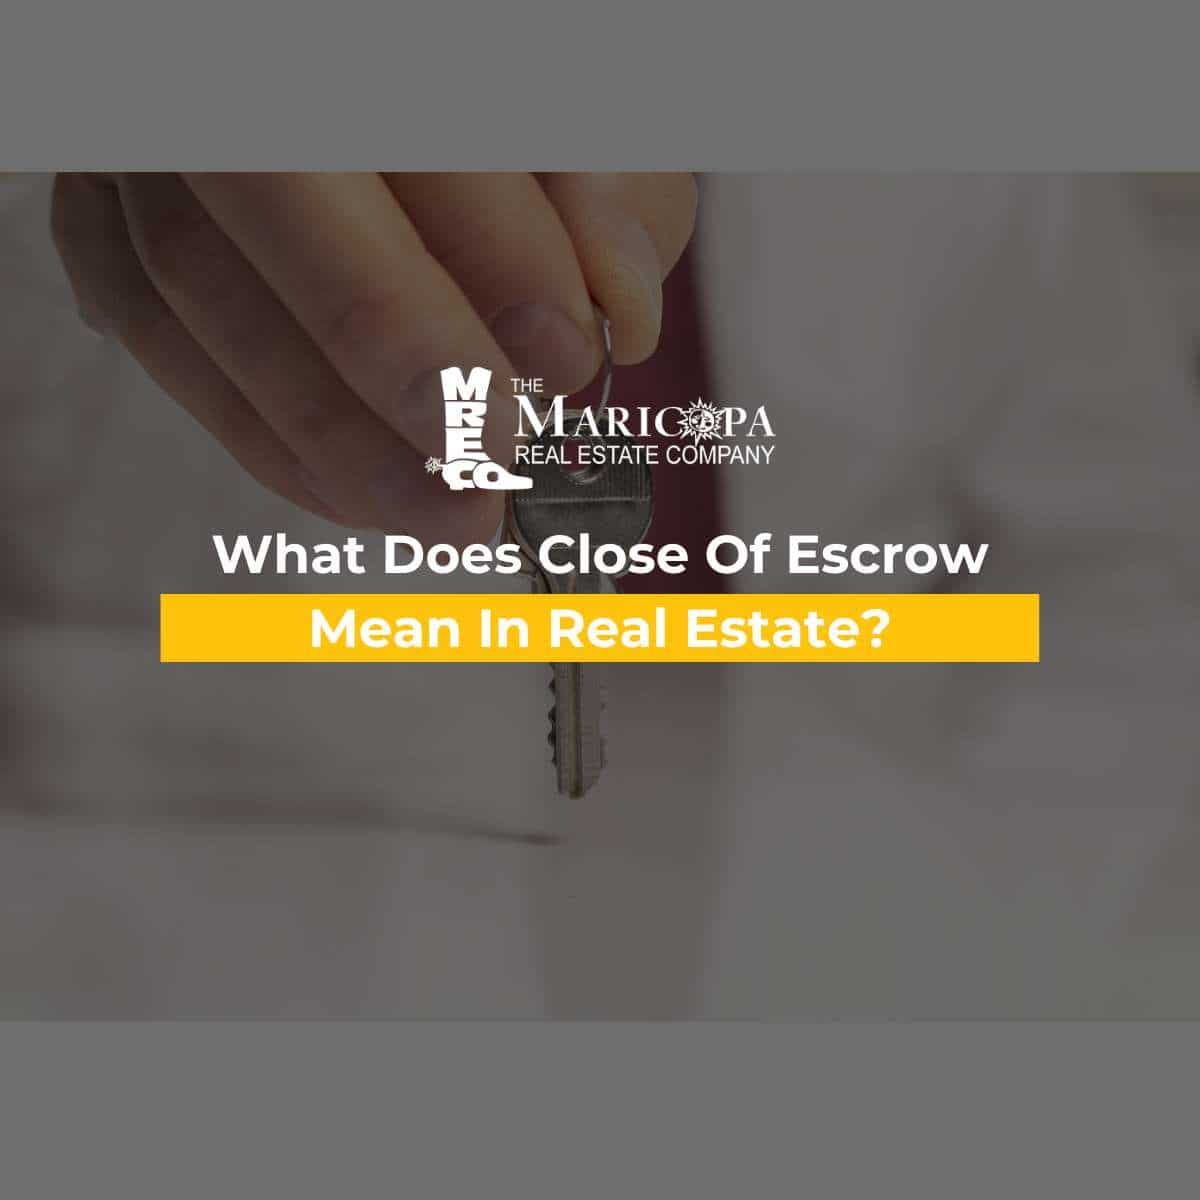 What Does Close Of Escrow Mean In Real Estate